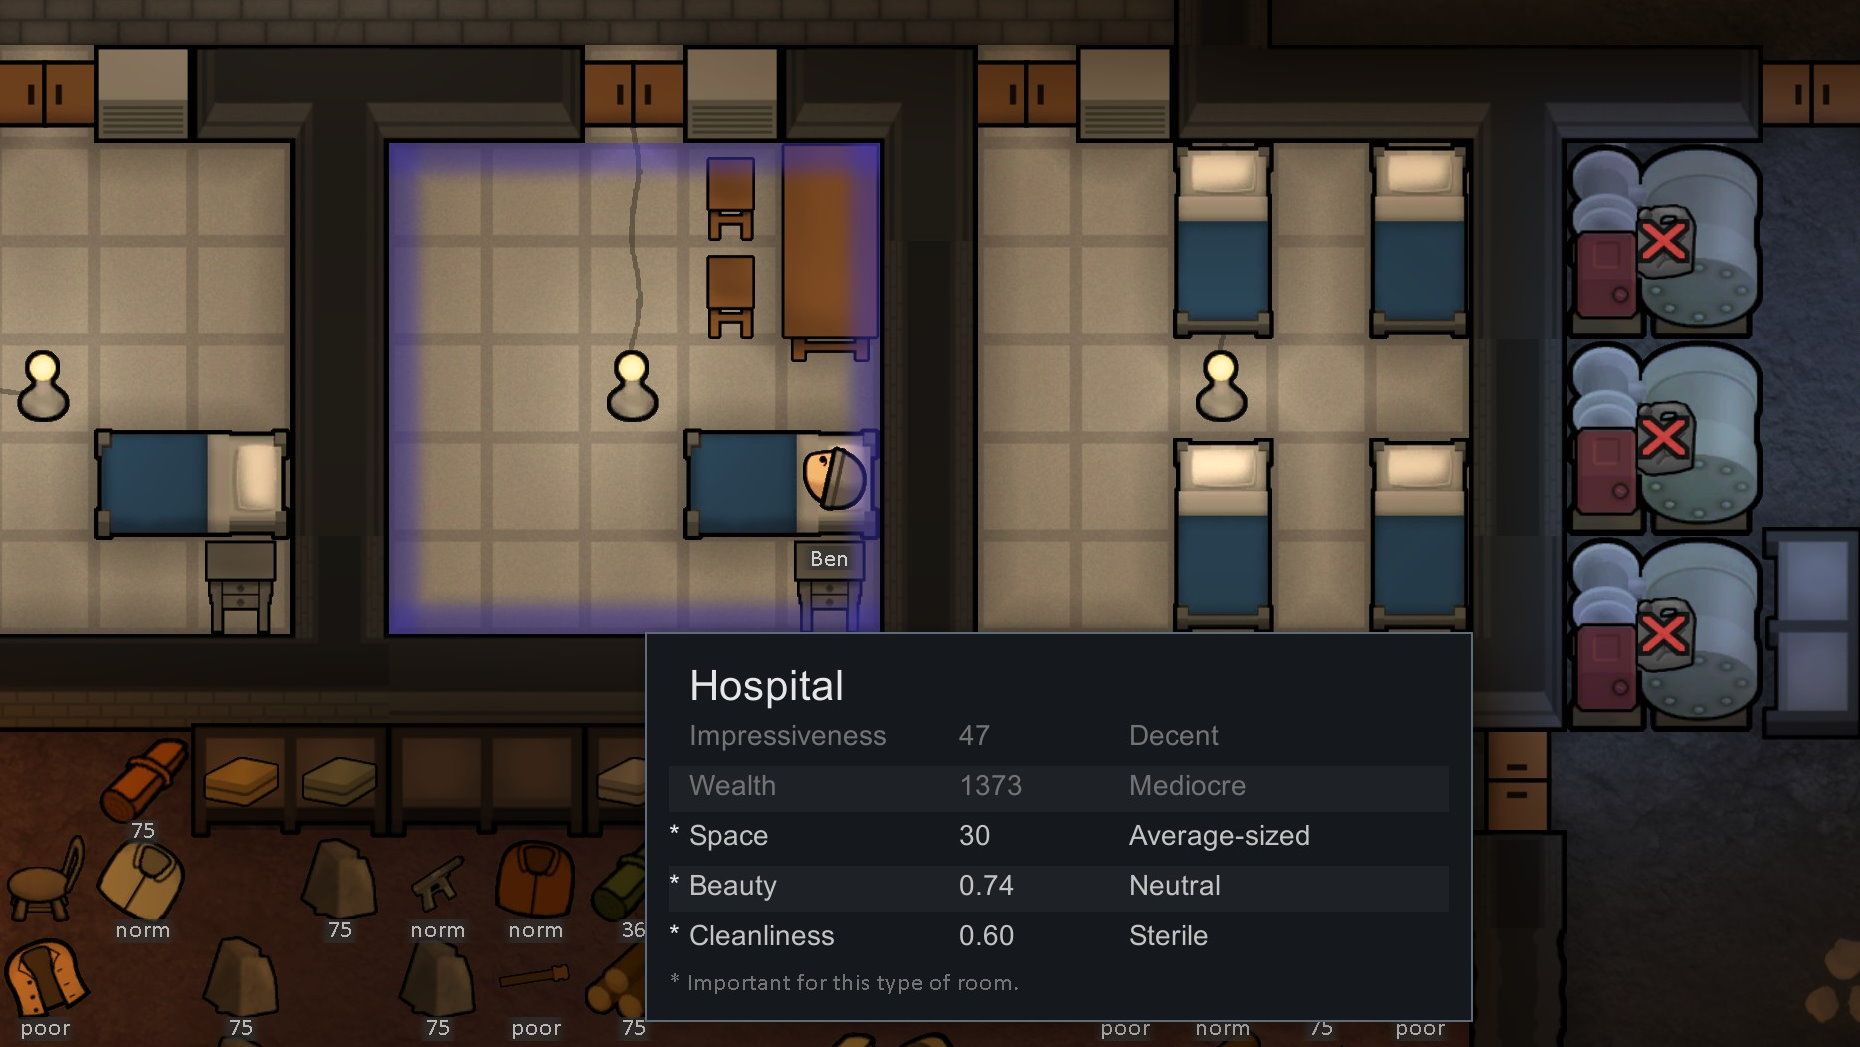 Room stats display of the hospital in RimWorld